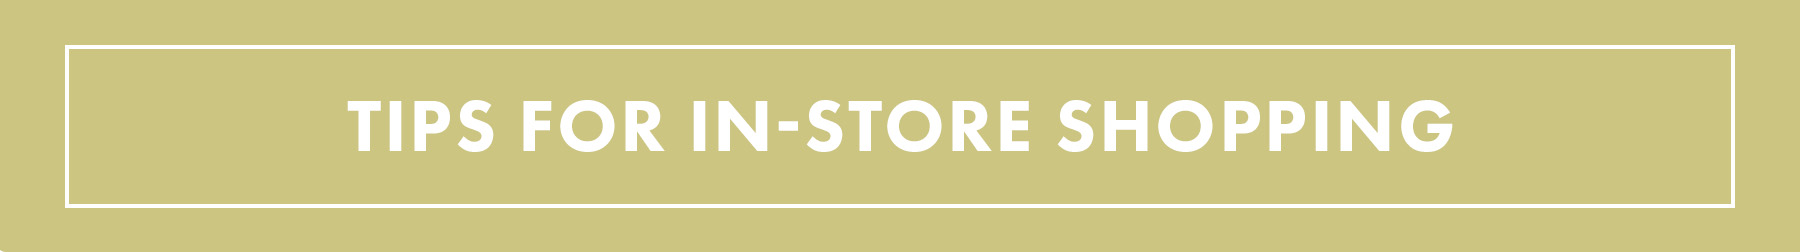 Tips for in-store shopping